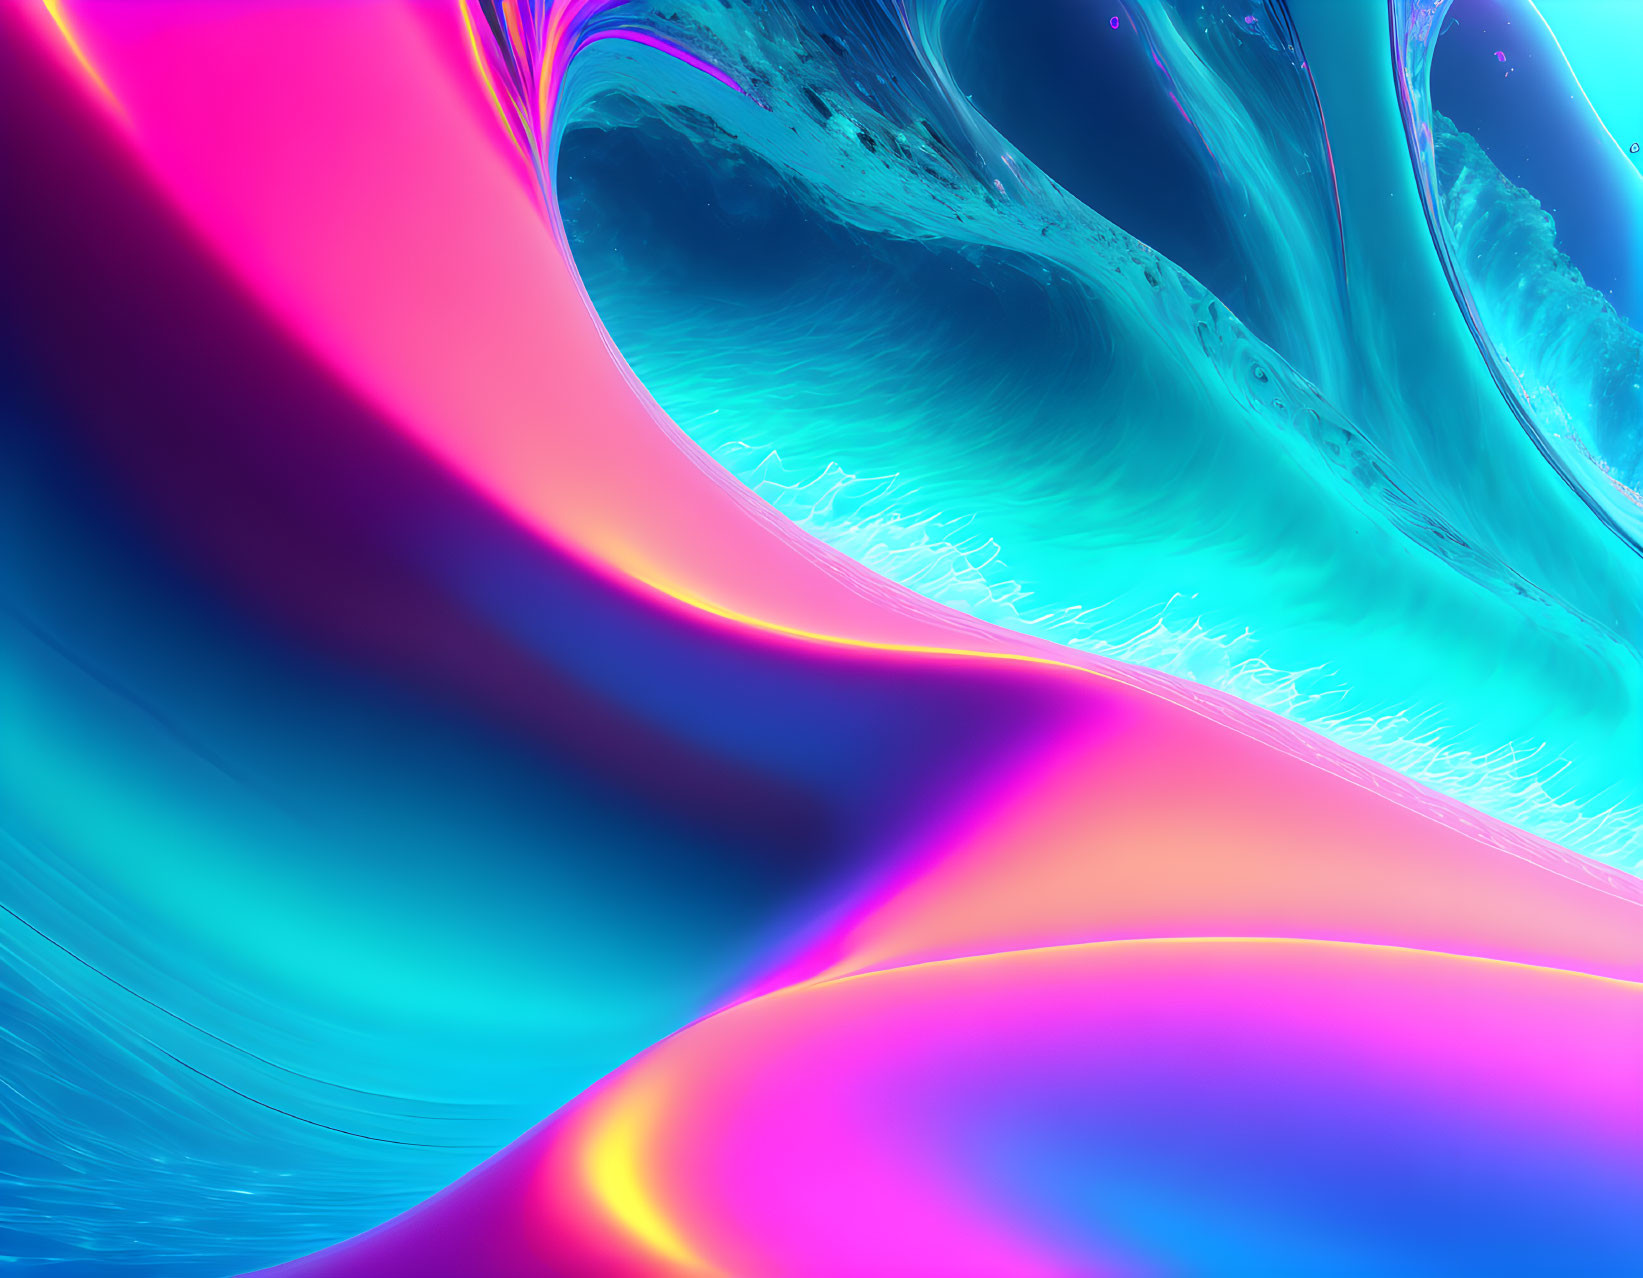 Colorful Abstract Waves in Pink, Blue, and Purple Hues